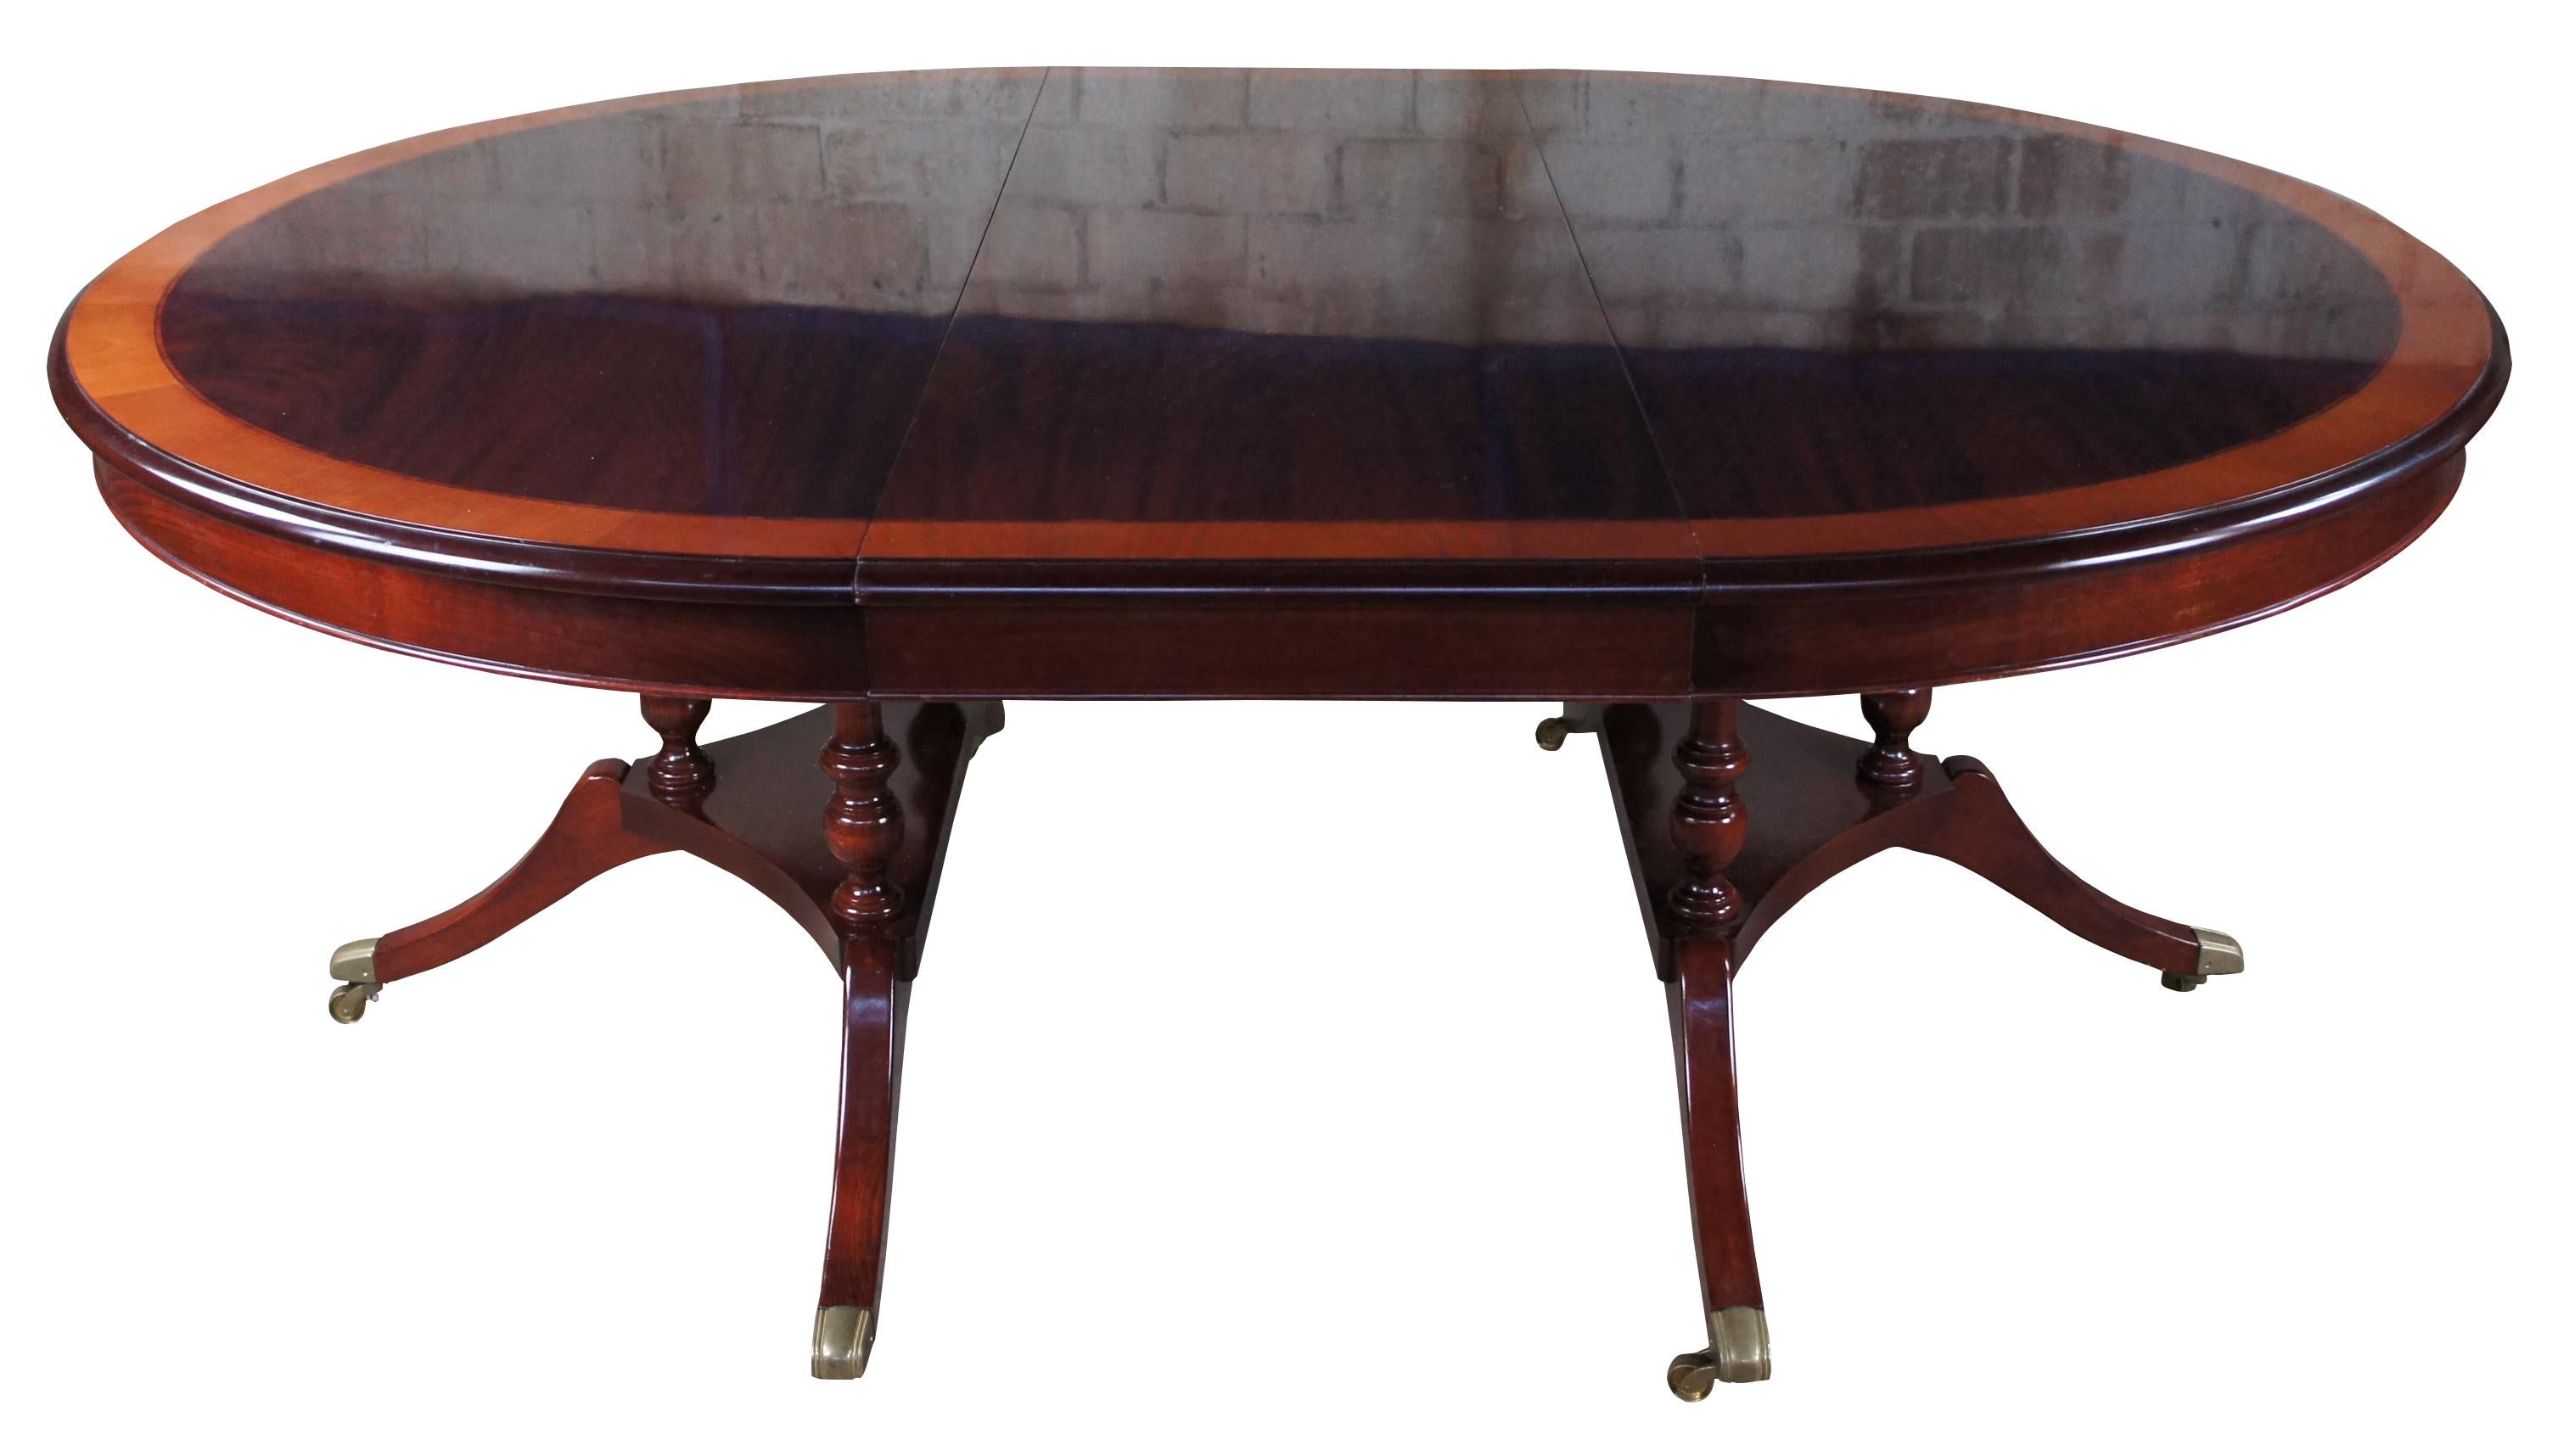 Vintage flame mahogany pedestal table featuring round or oval form with banded top, double pedestal base and swivel castors. Attributed to Ethan Allen's 18th Century Collection.

Two 20